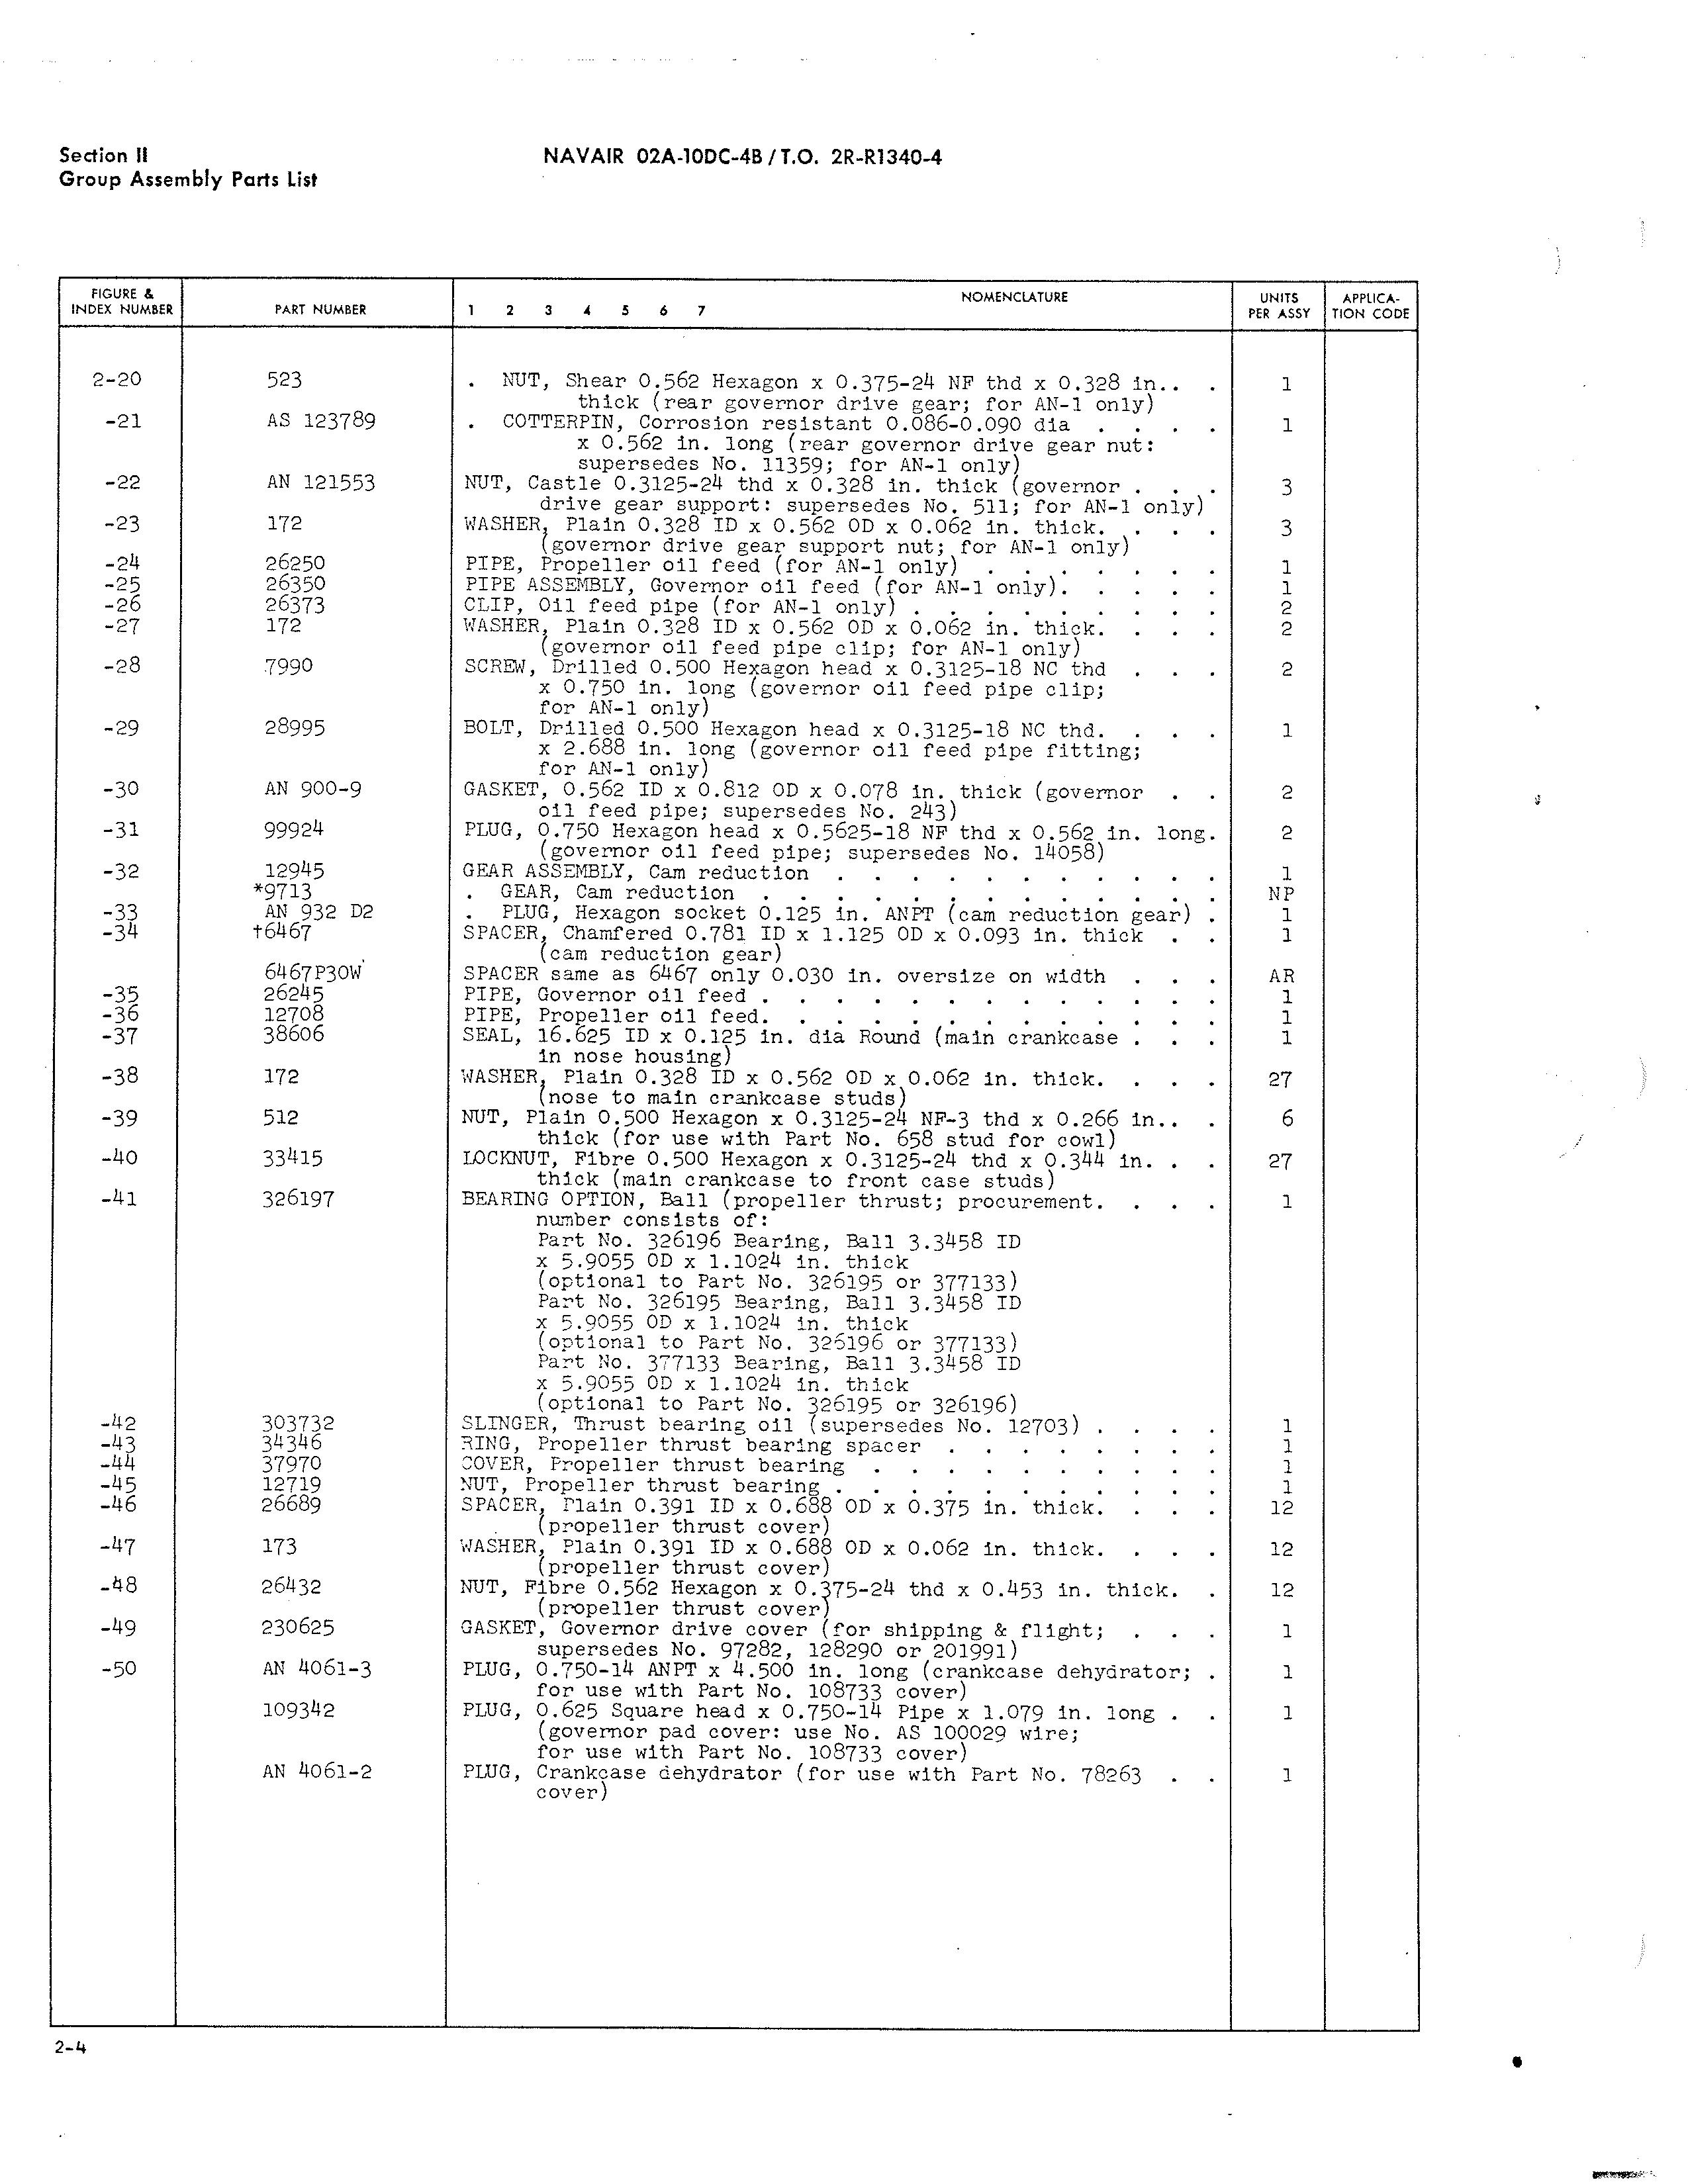 Sample page 16 from AirCorps Library document: Illustrated Parts Breakdown for R1340-AN-1, -45, -48A, -52, and -57 Engines